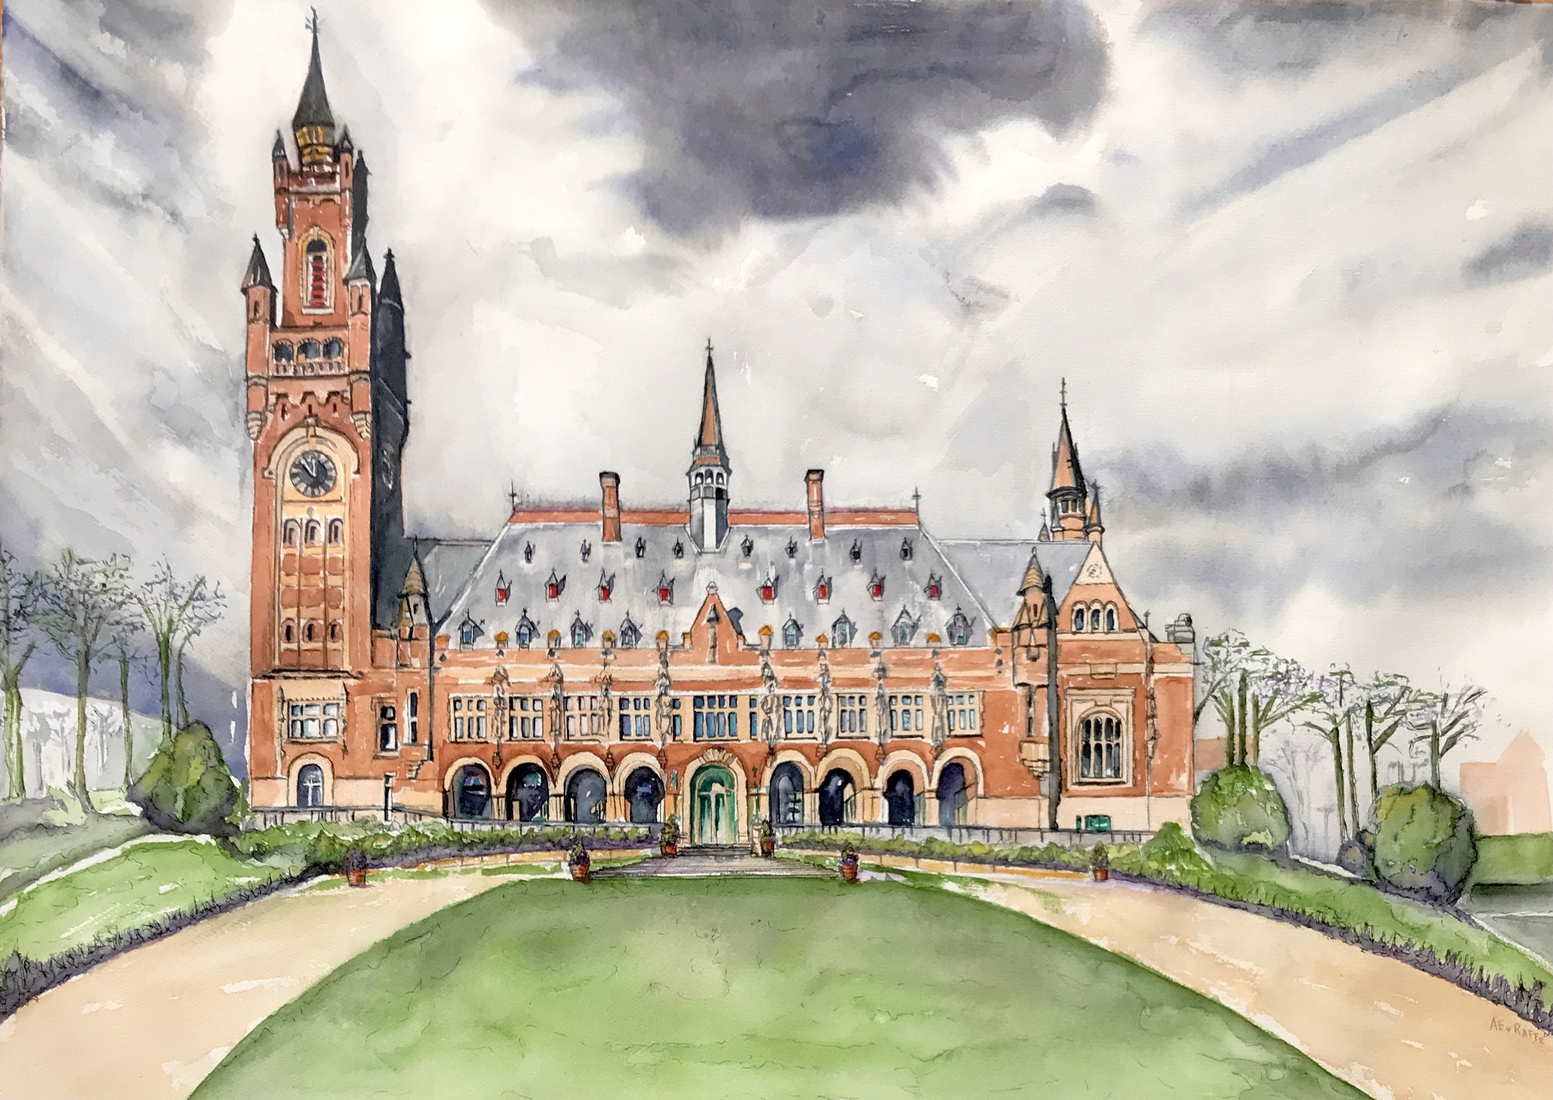 Dark clouds above the Peace Palace